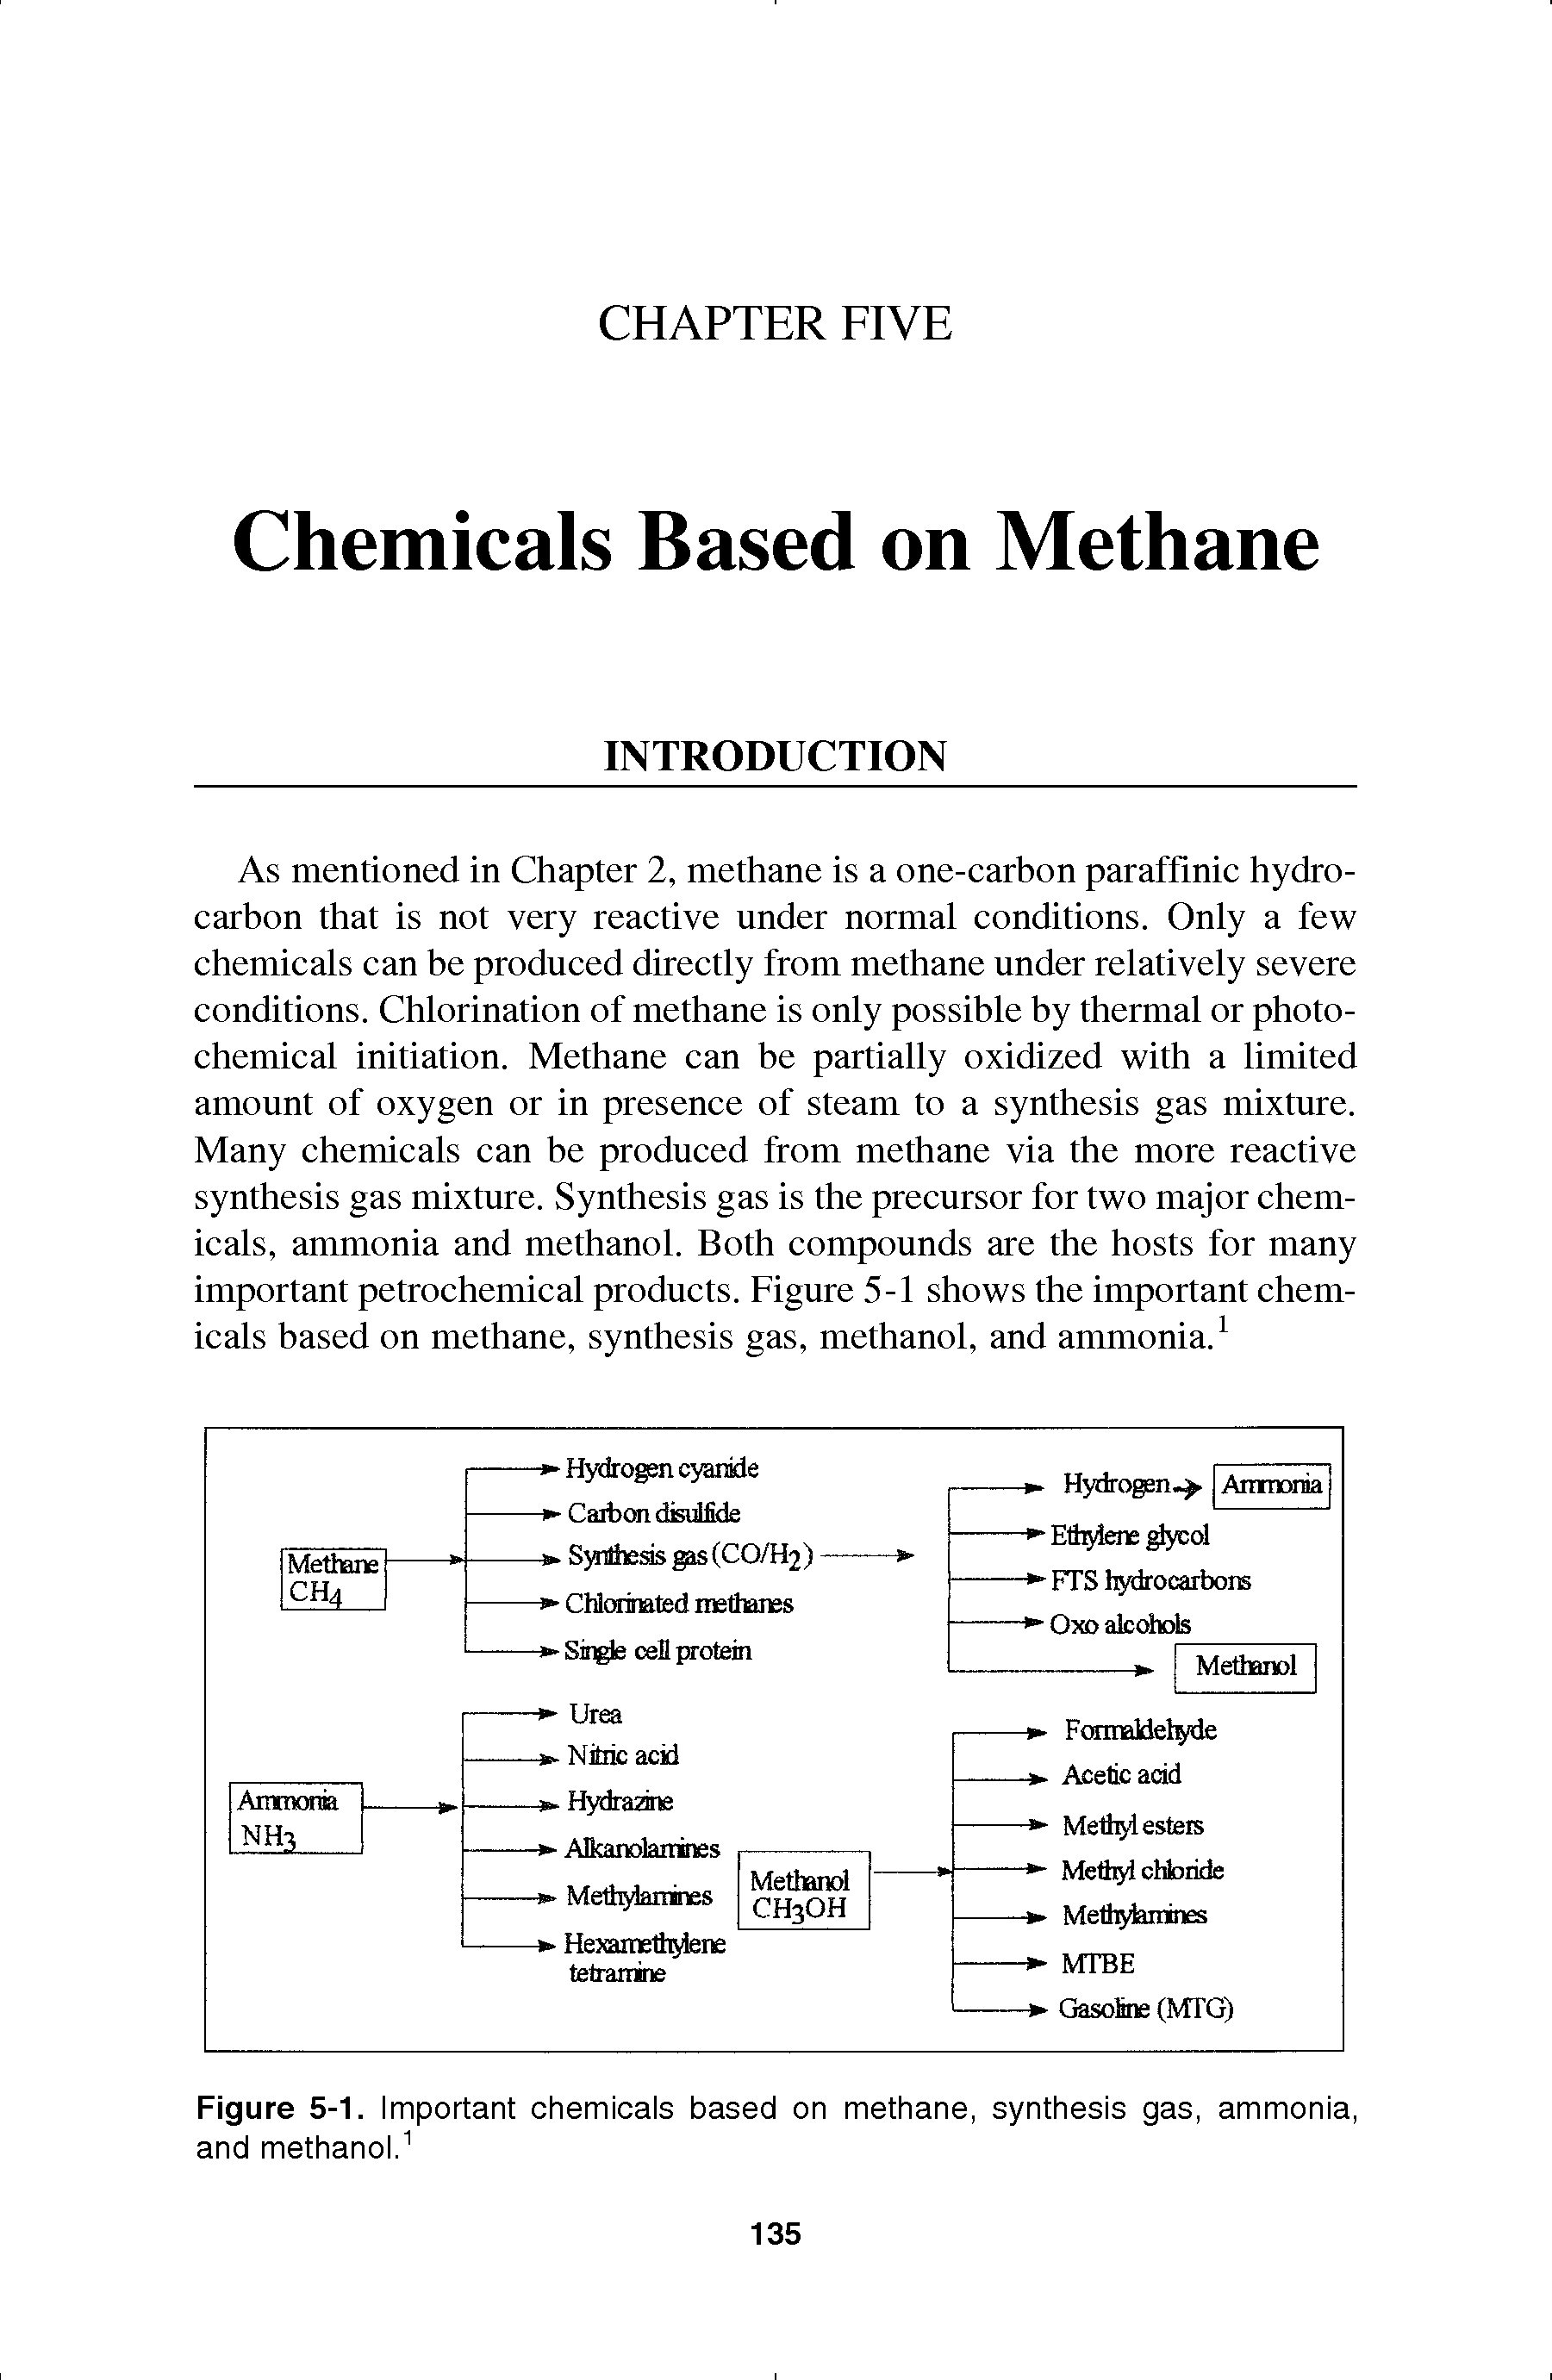 Figure 5-1. Important chemicals based on methane, synthesis gas, ammonia, and methanol. ...